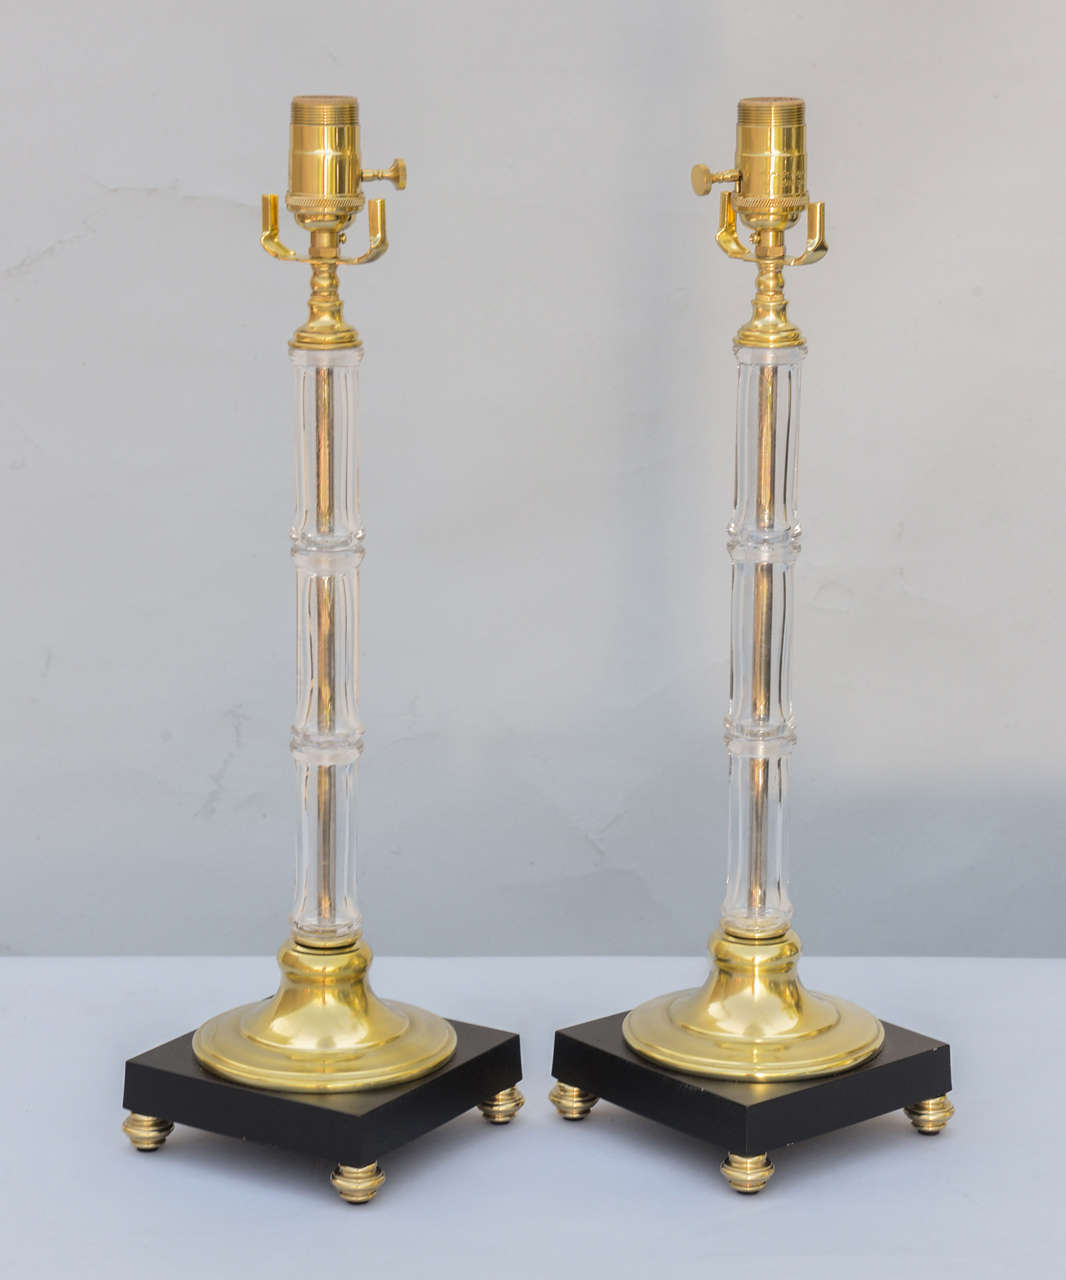 Pair of lamps, by Warren Kessler, each a glass "bamboo" stalk on round brass base and square black plinth raised on brass bun feet.